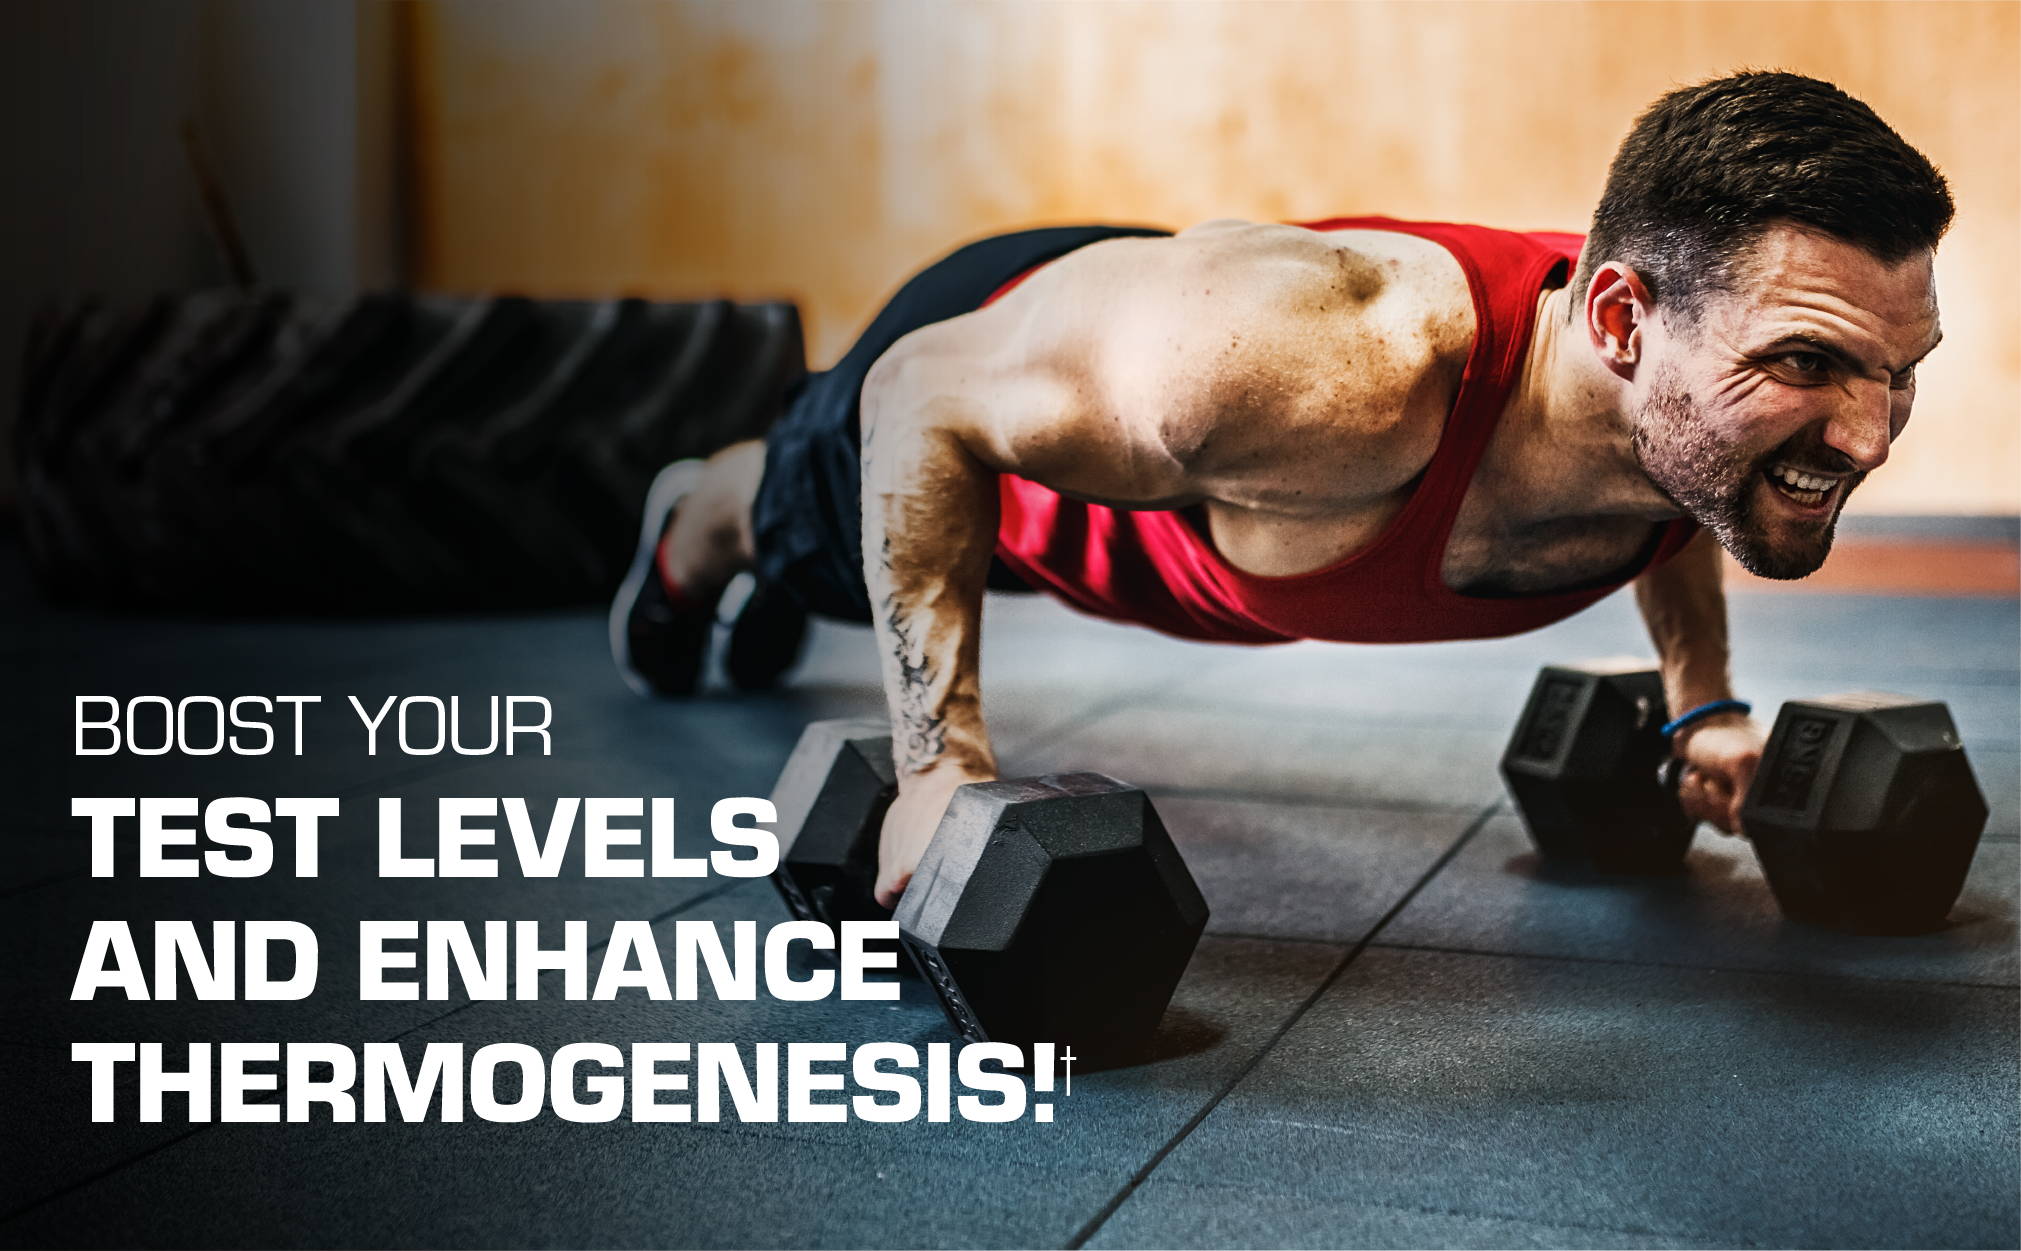 Boost Your Test Levels and Enhance Thermogenesis